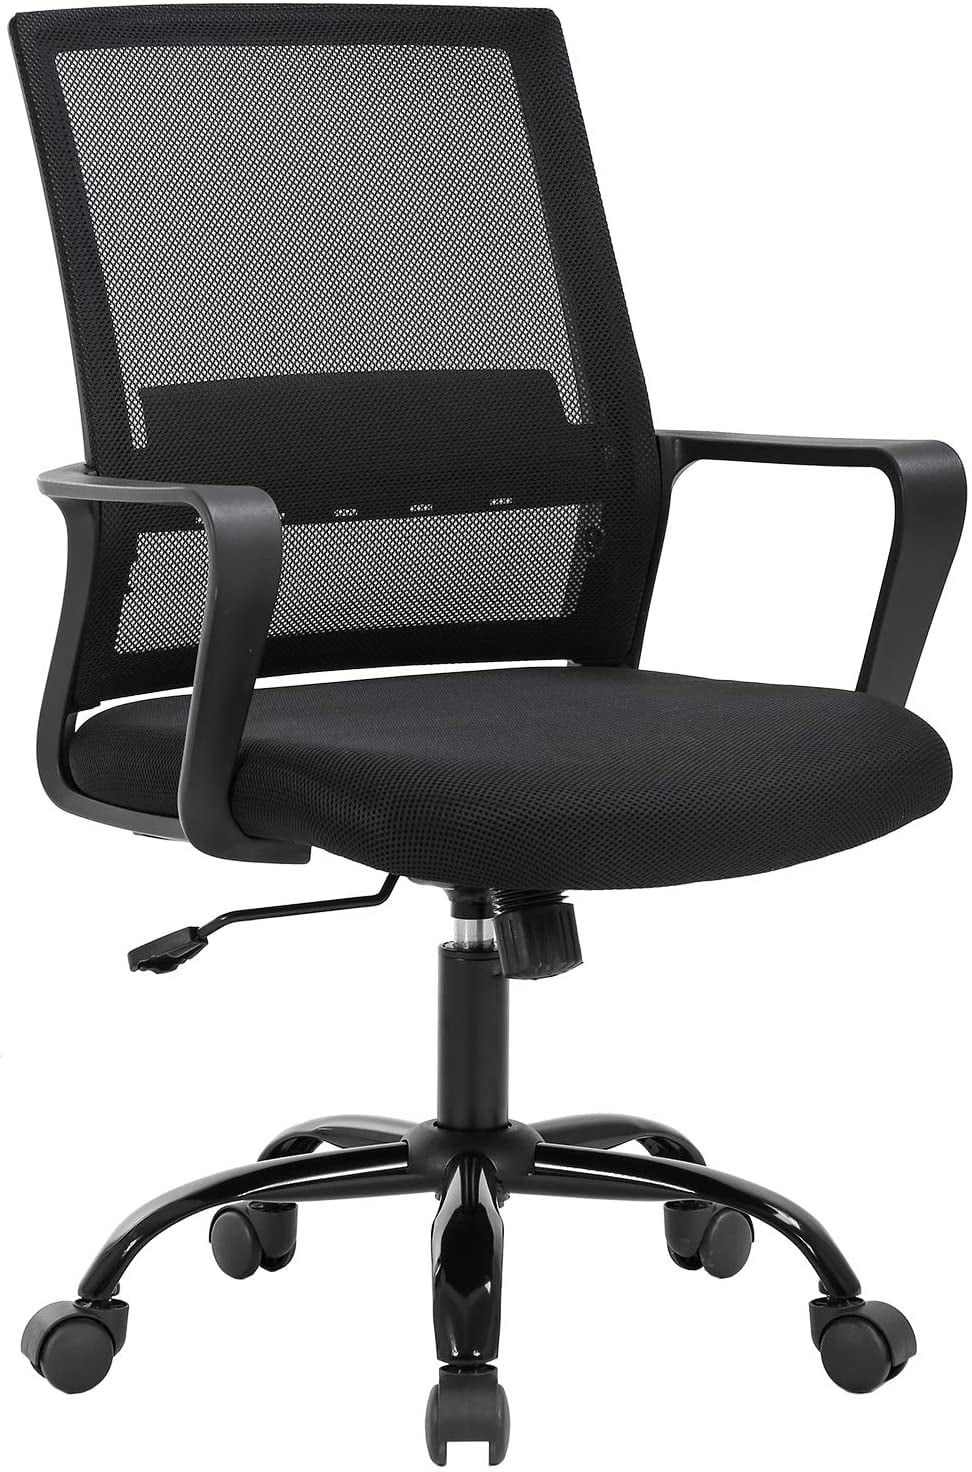  BNEHS Office Chair Ergonomic,Branch Mesh Chair for Heavy People  with Slide Seat, Executive Desk Chair for Back Pain with Adjustable  Headrest,Black : Office Products